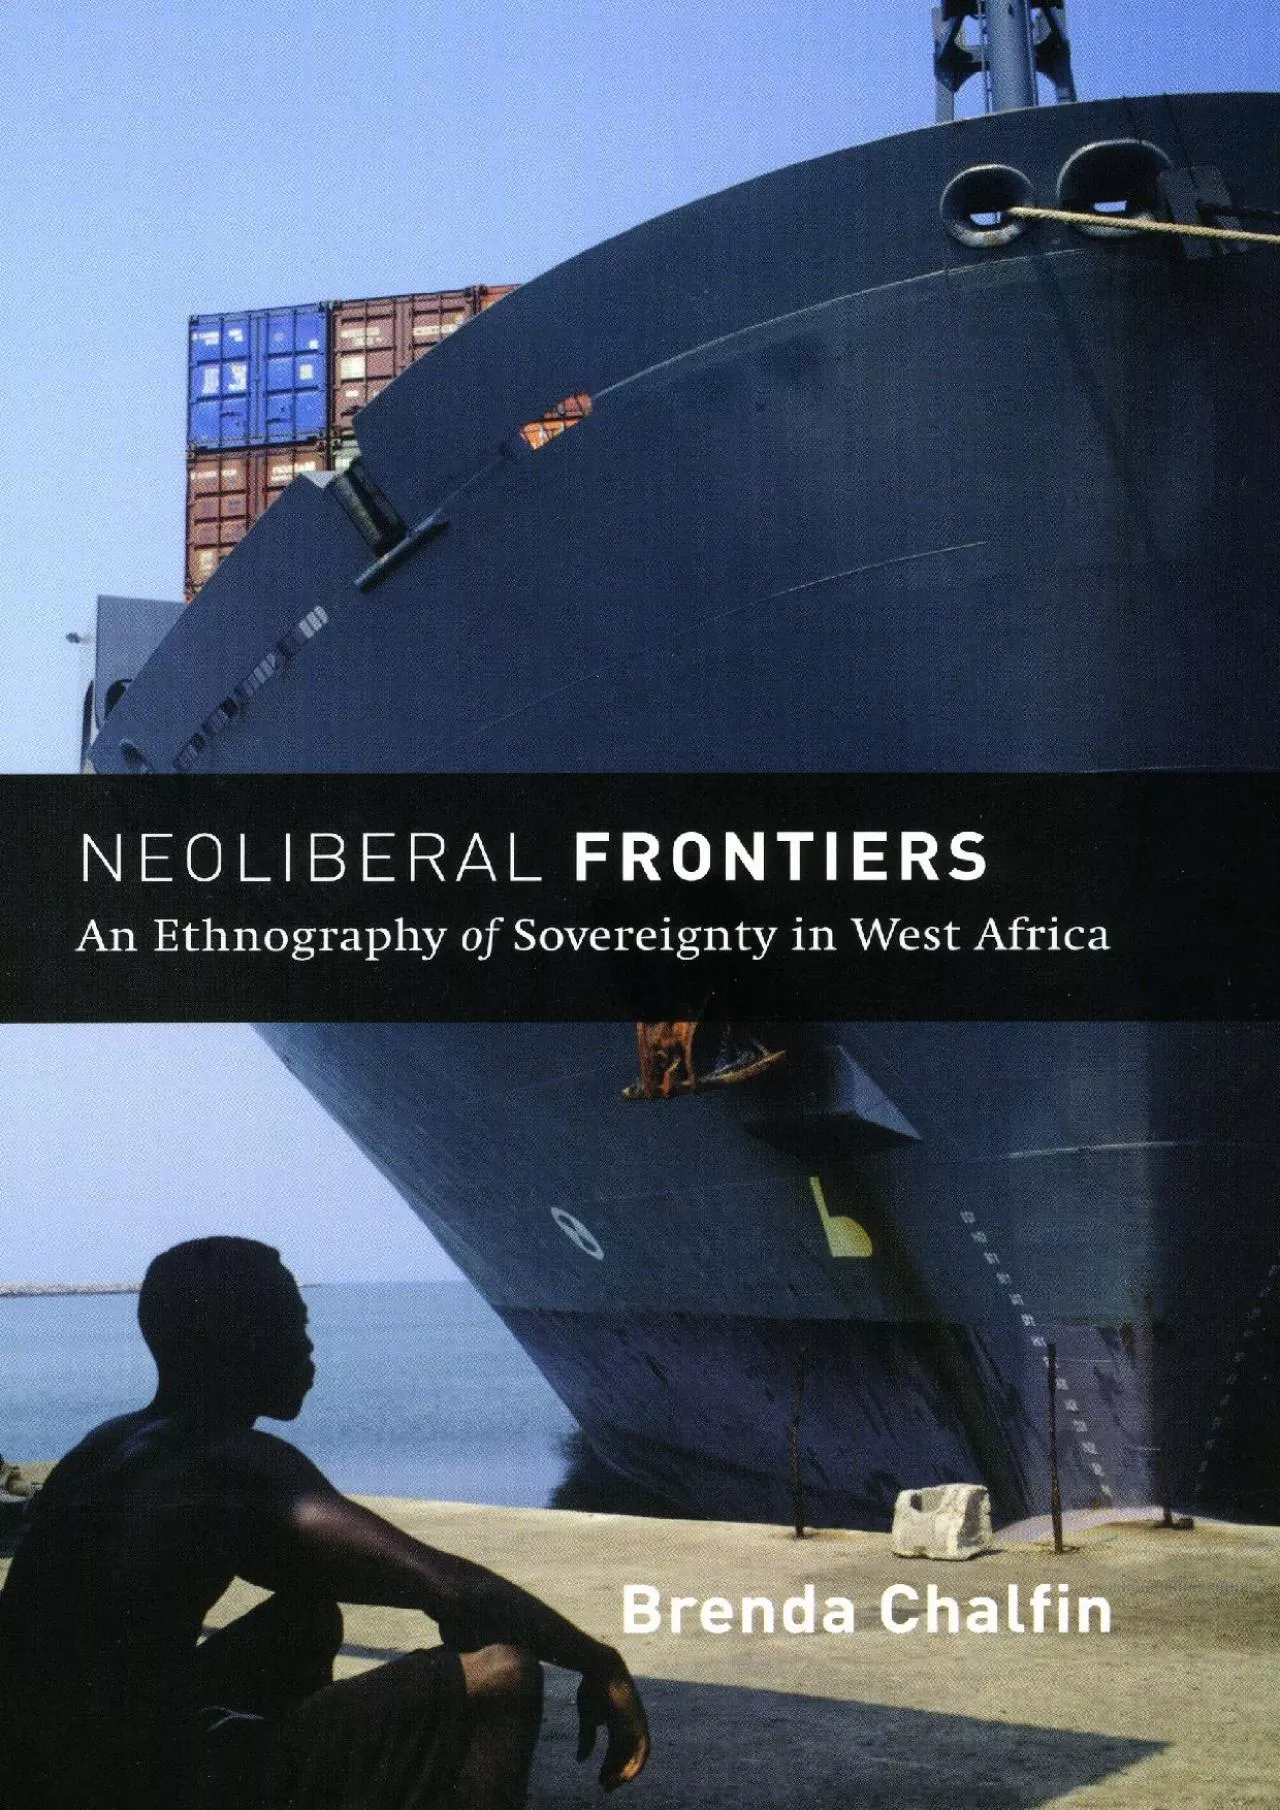 (DOWNLOAD)-Neoliberal Frontiers: An Ethnography of Sovereignty in West Africa (Chicago